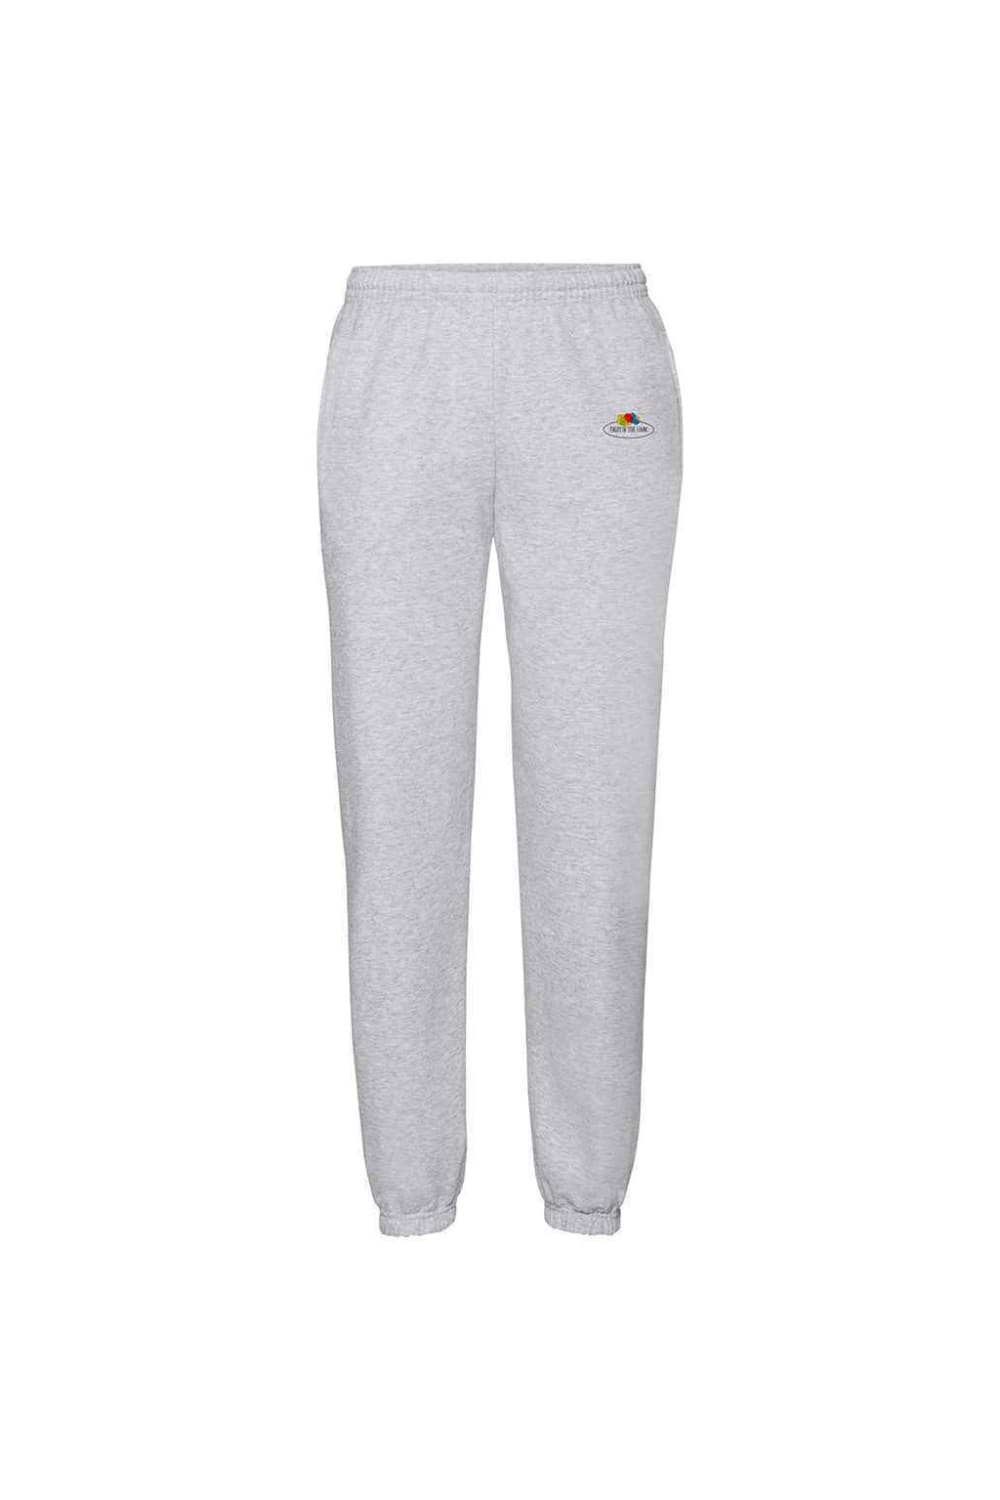 Fruit of the Loom Mens Vintage Small Logo Sweatpants (Gray Heather)